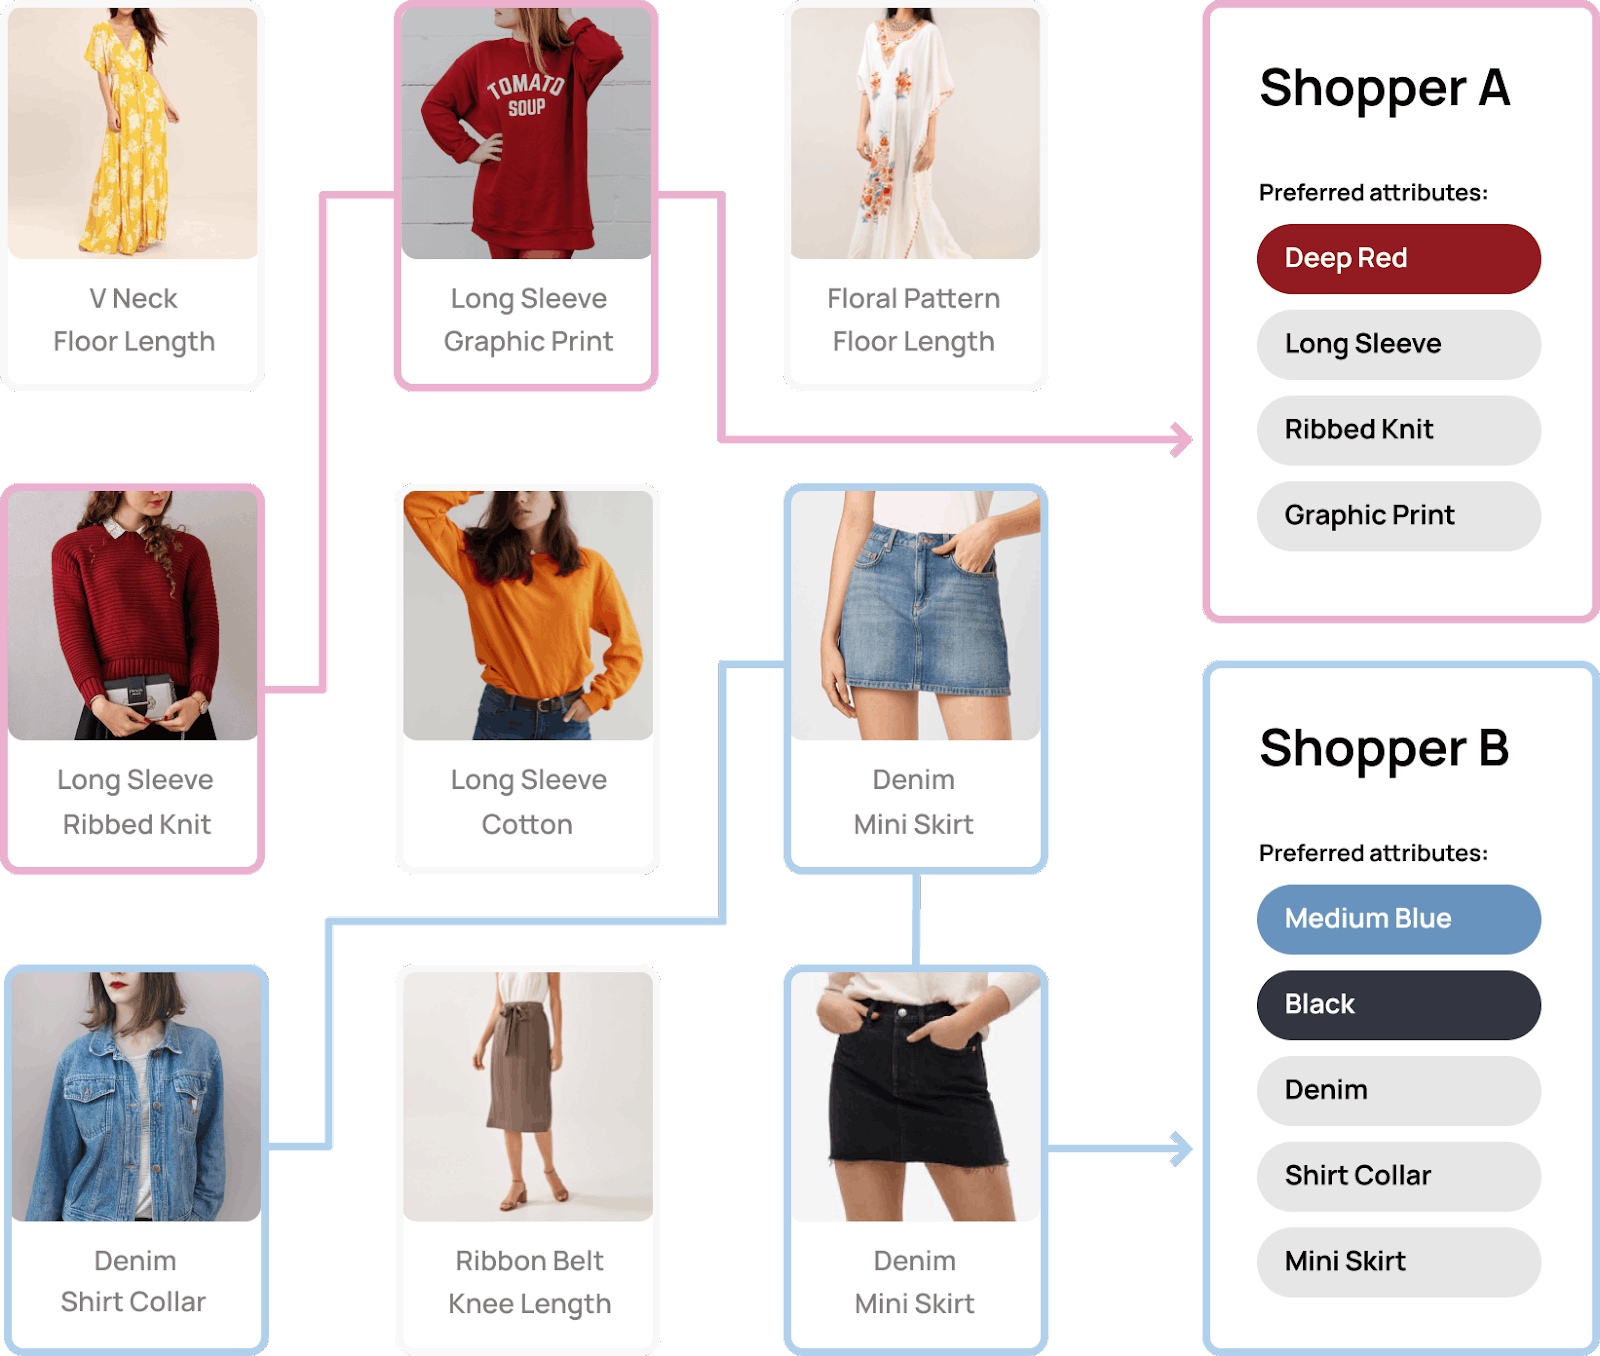 Rosetta AI preference analytics image showing two apparel shopper preference profiles.